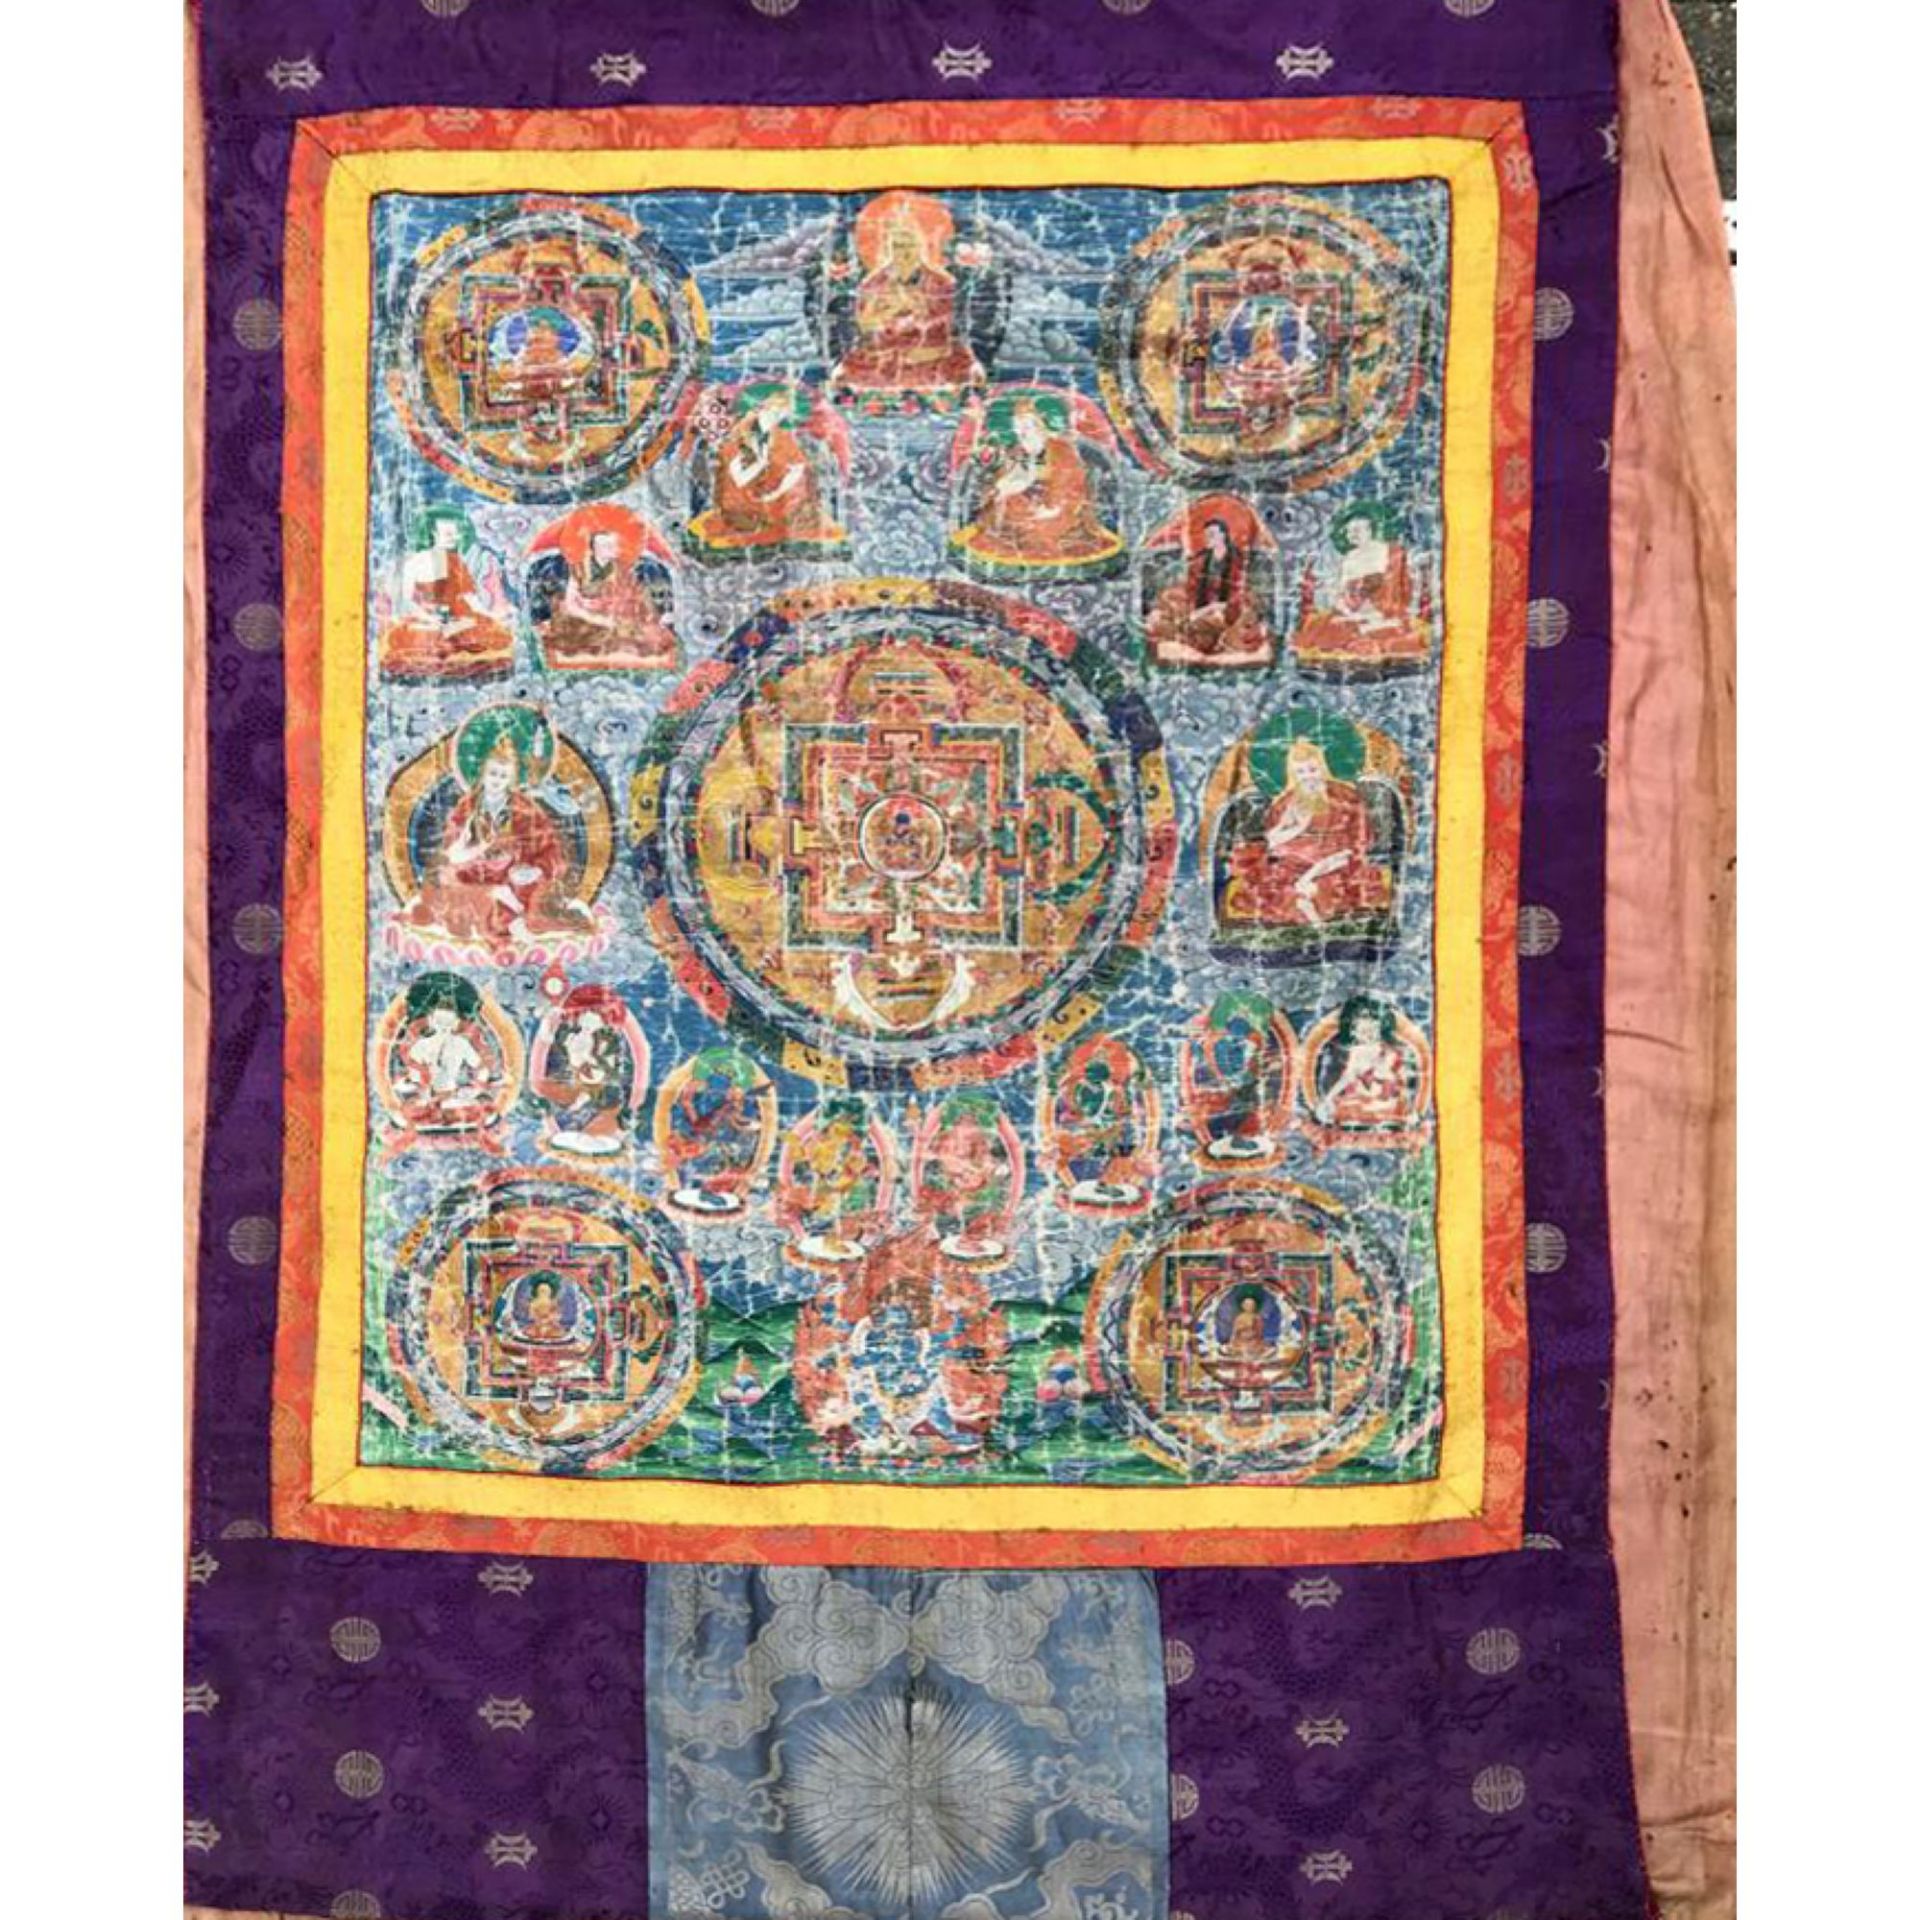 Thangka, Tibet 19th century, polychrome pigments and gold on cloth in a multicolored brocade